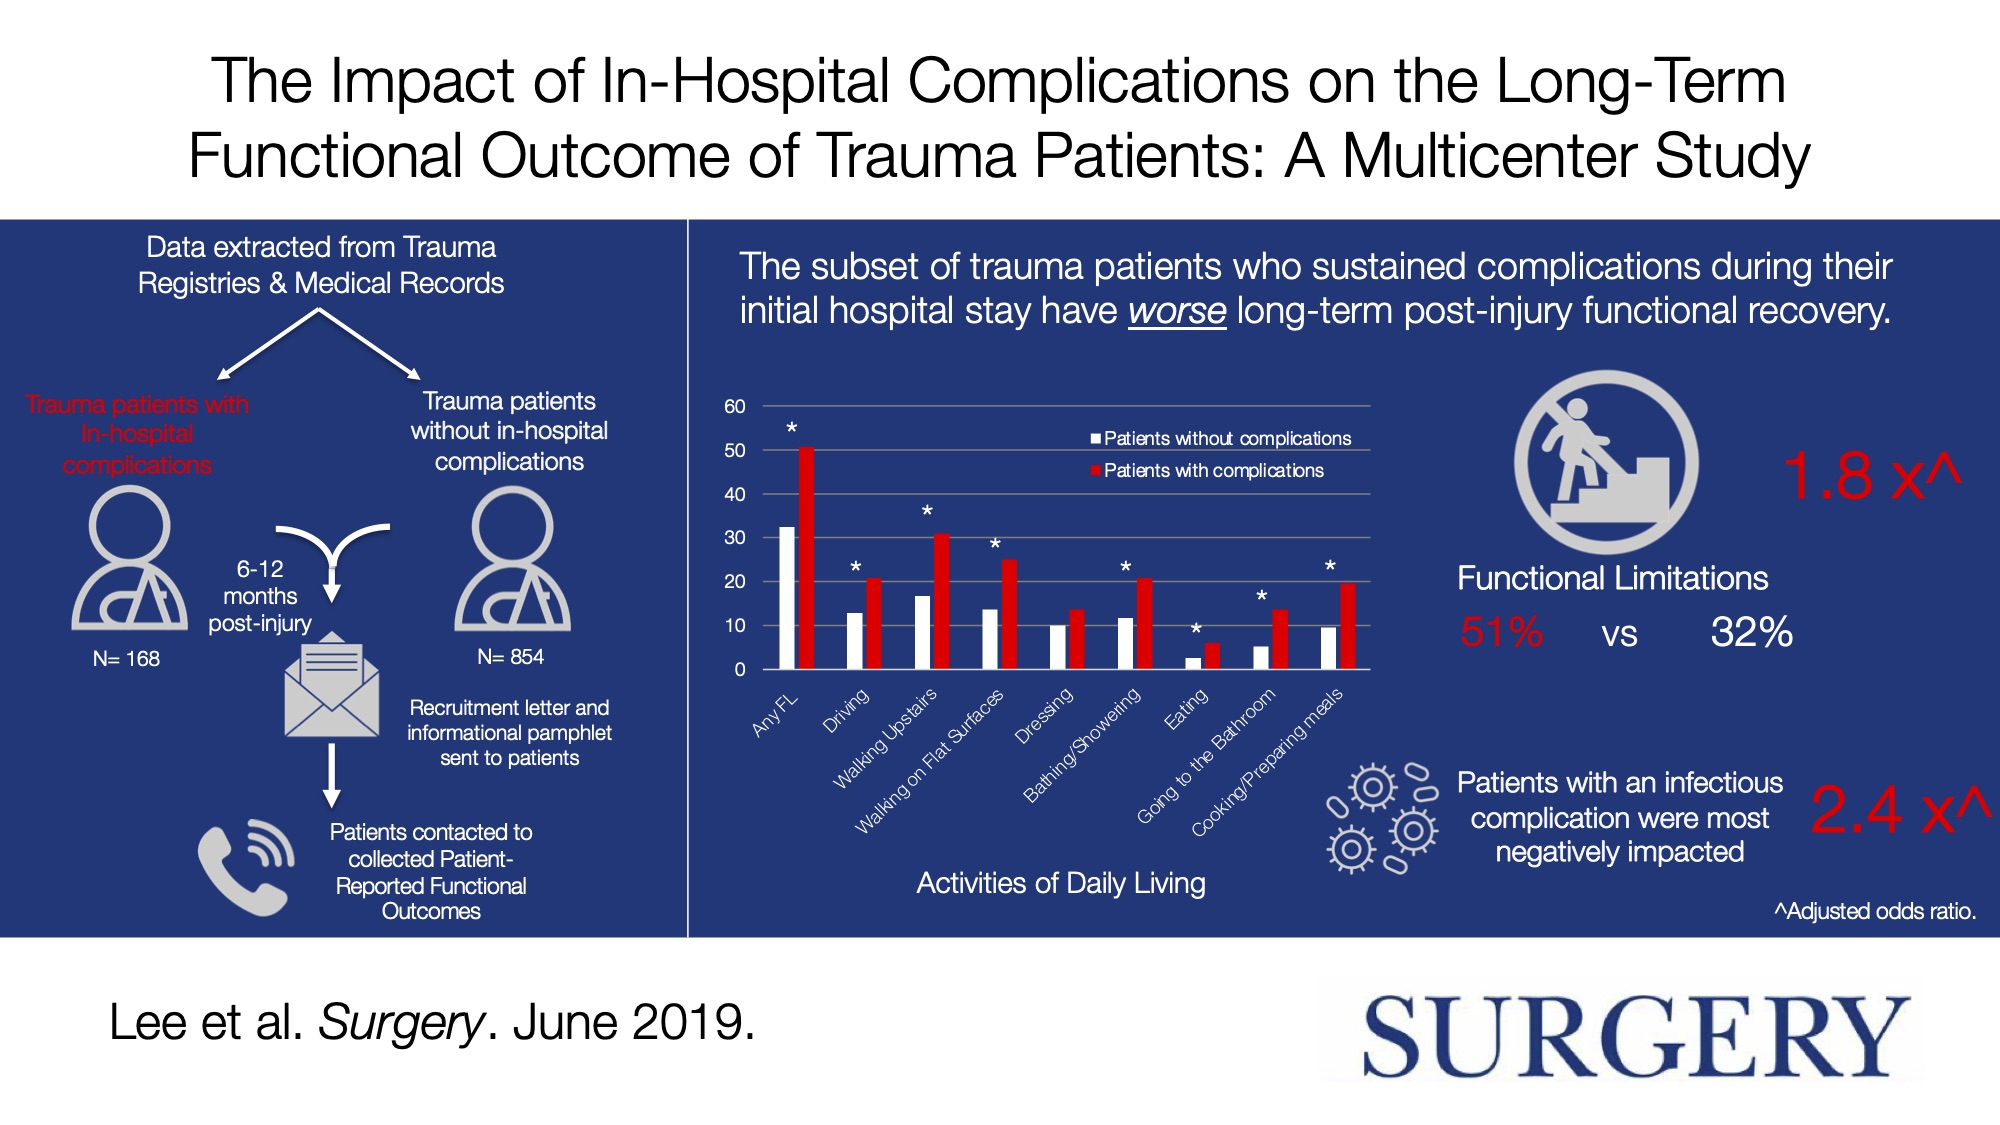 10. In-hospital complications and functional outcomes